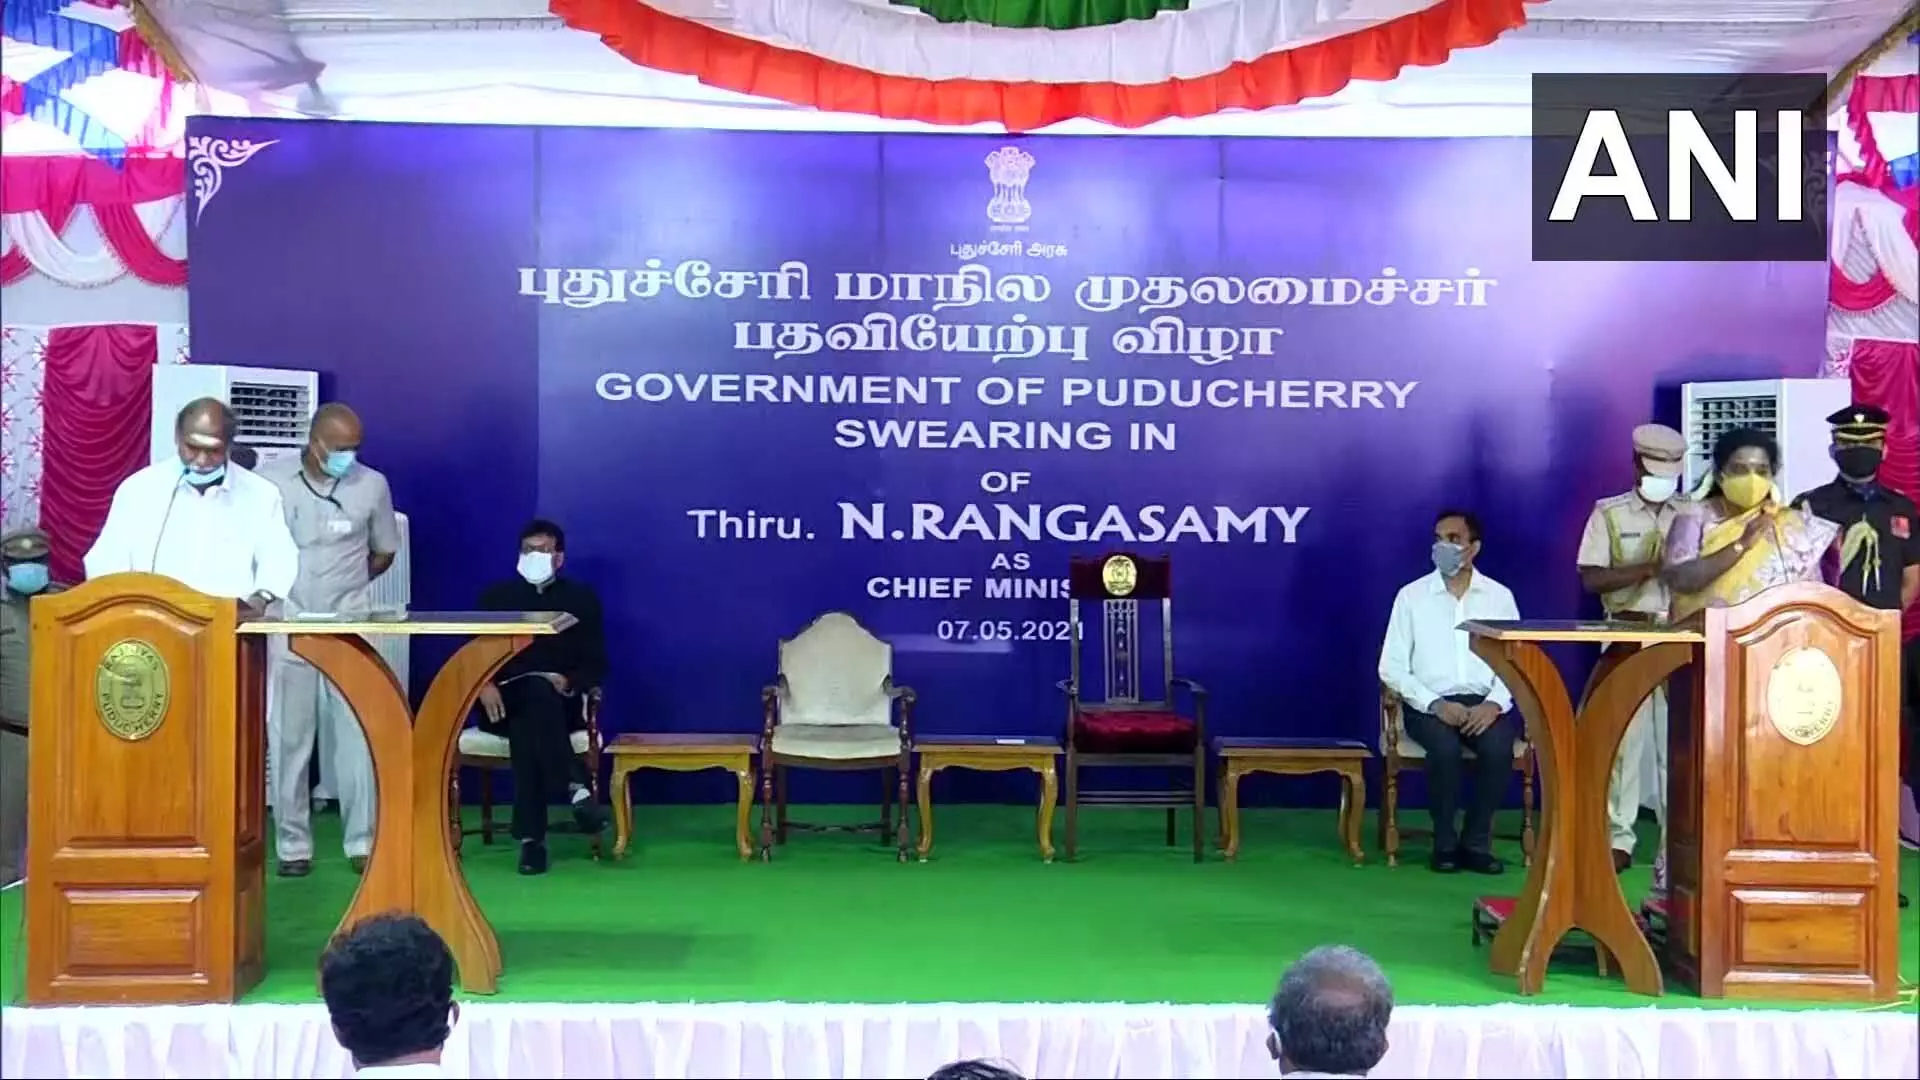 N. Rangaswamy has become the CM of the Union Territory of Puducherry. Rangaswamy, the head of the All India NR Congress (AINRC), has administered the oath of Chief Minister by Lieutenant Governor Tamilisai Sundararajan in a simple ceremony at Raj Niwas today.